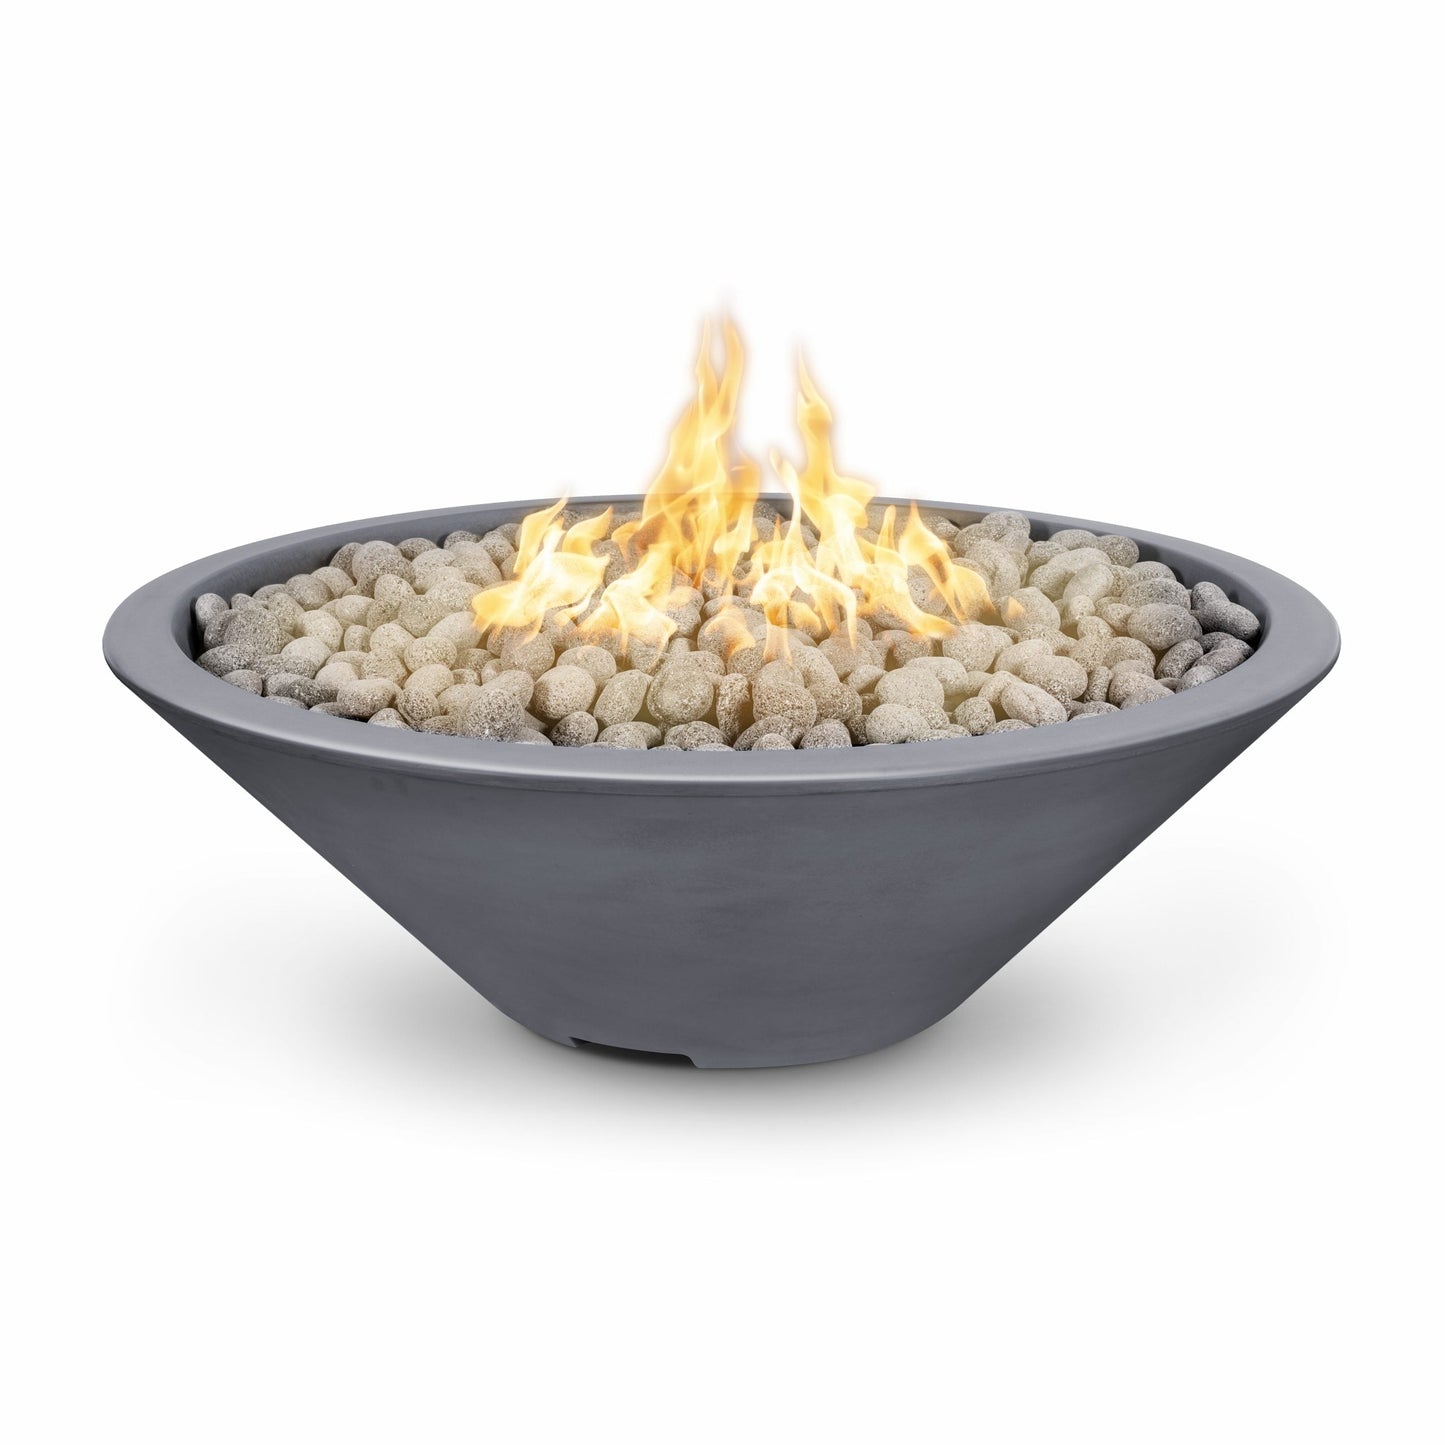 The Outdoor Plus Round Cazo 60" Java Powder Coated Metal Liquid Propane Fire Pit with Flame Sense with Spark Ignition